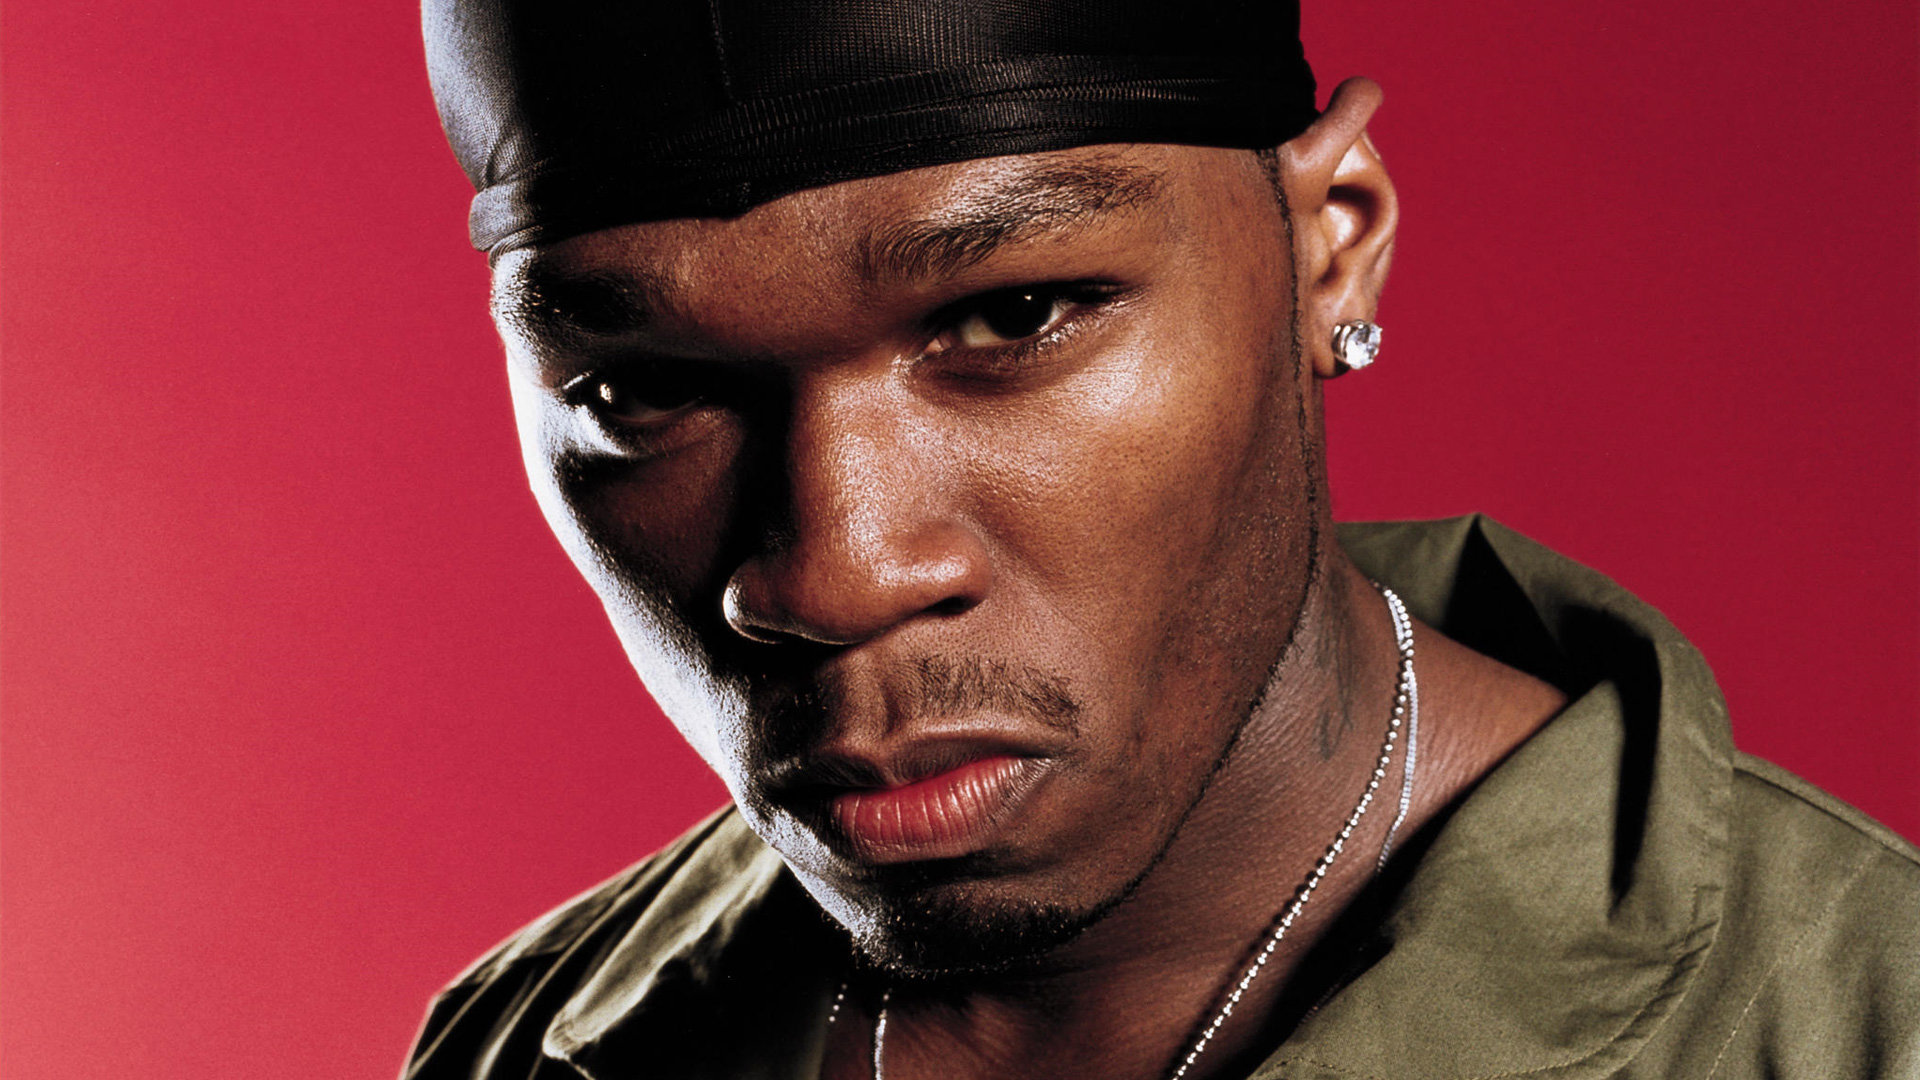 50 Cent wallpapers HD for desktop backgrounds